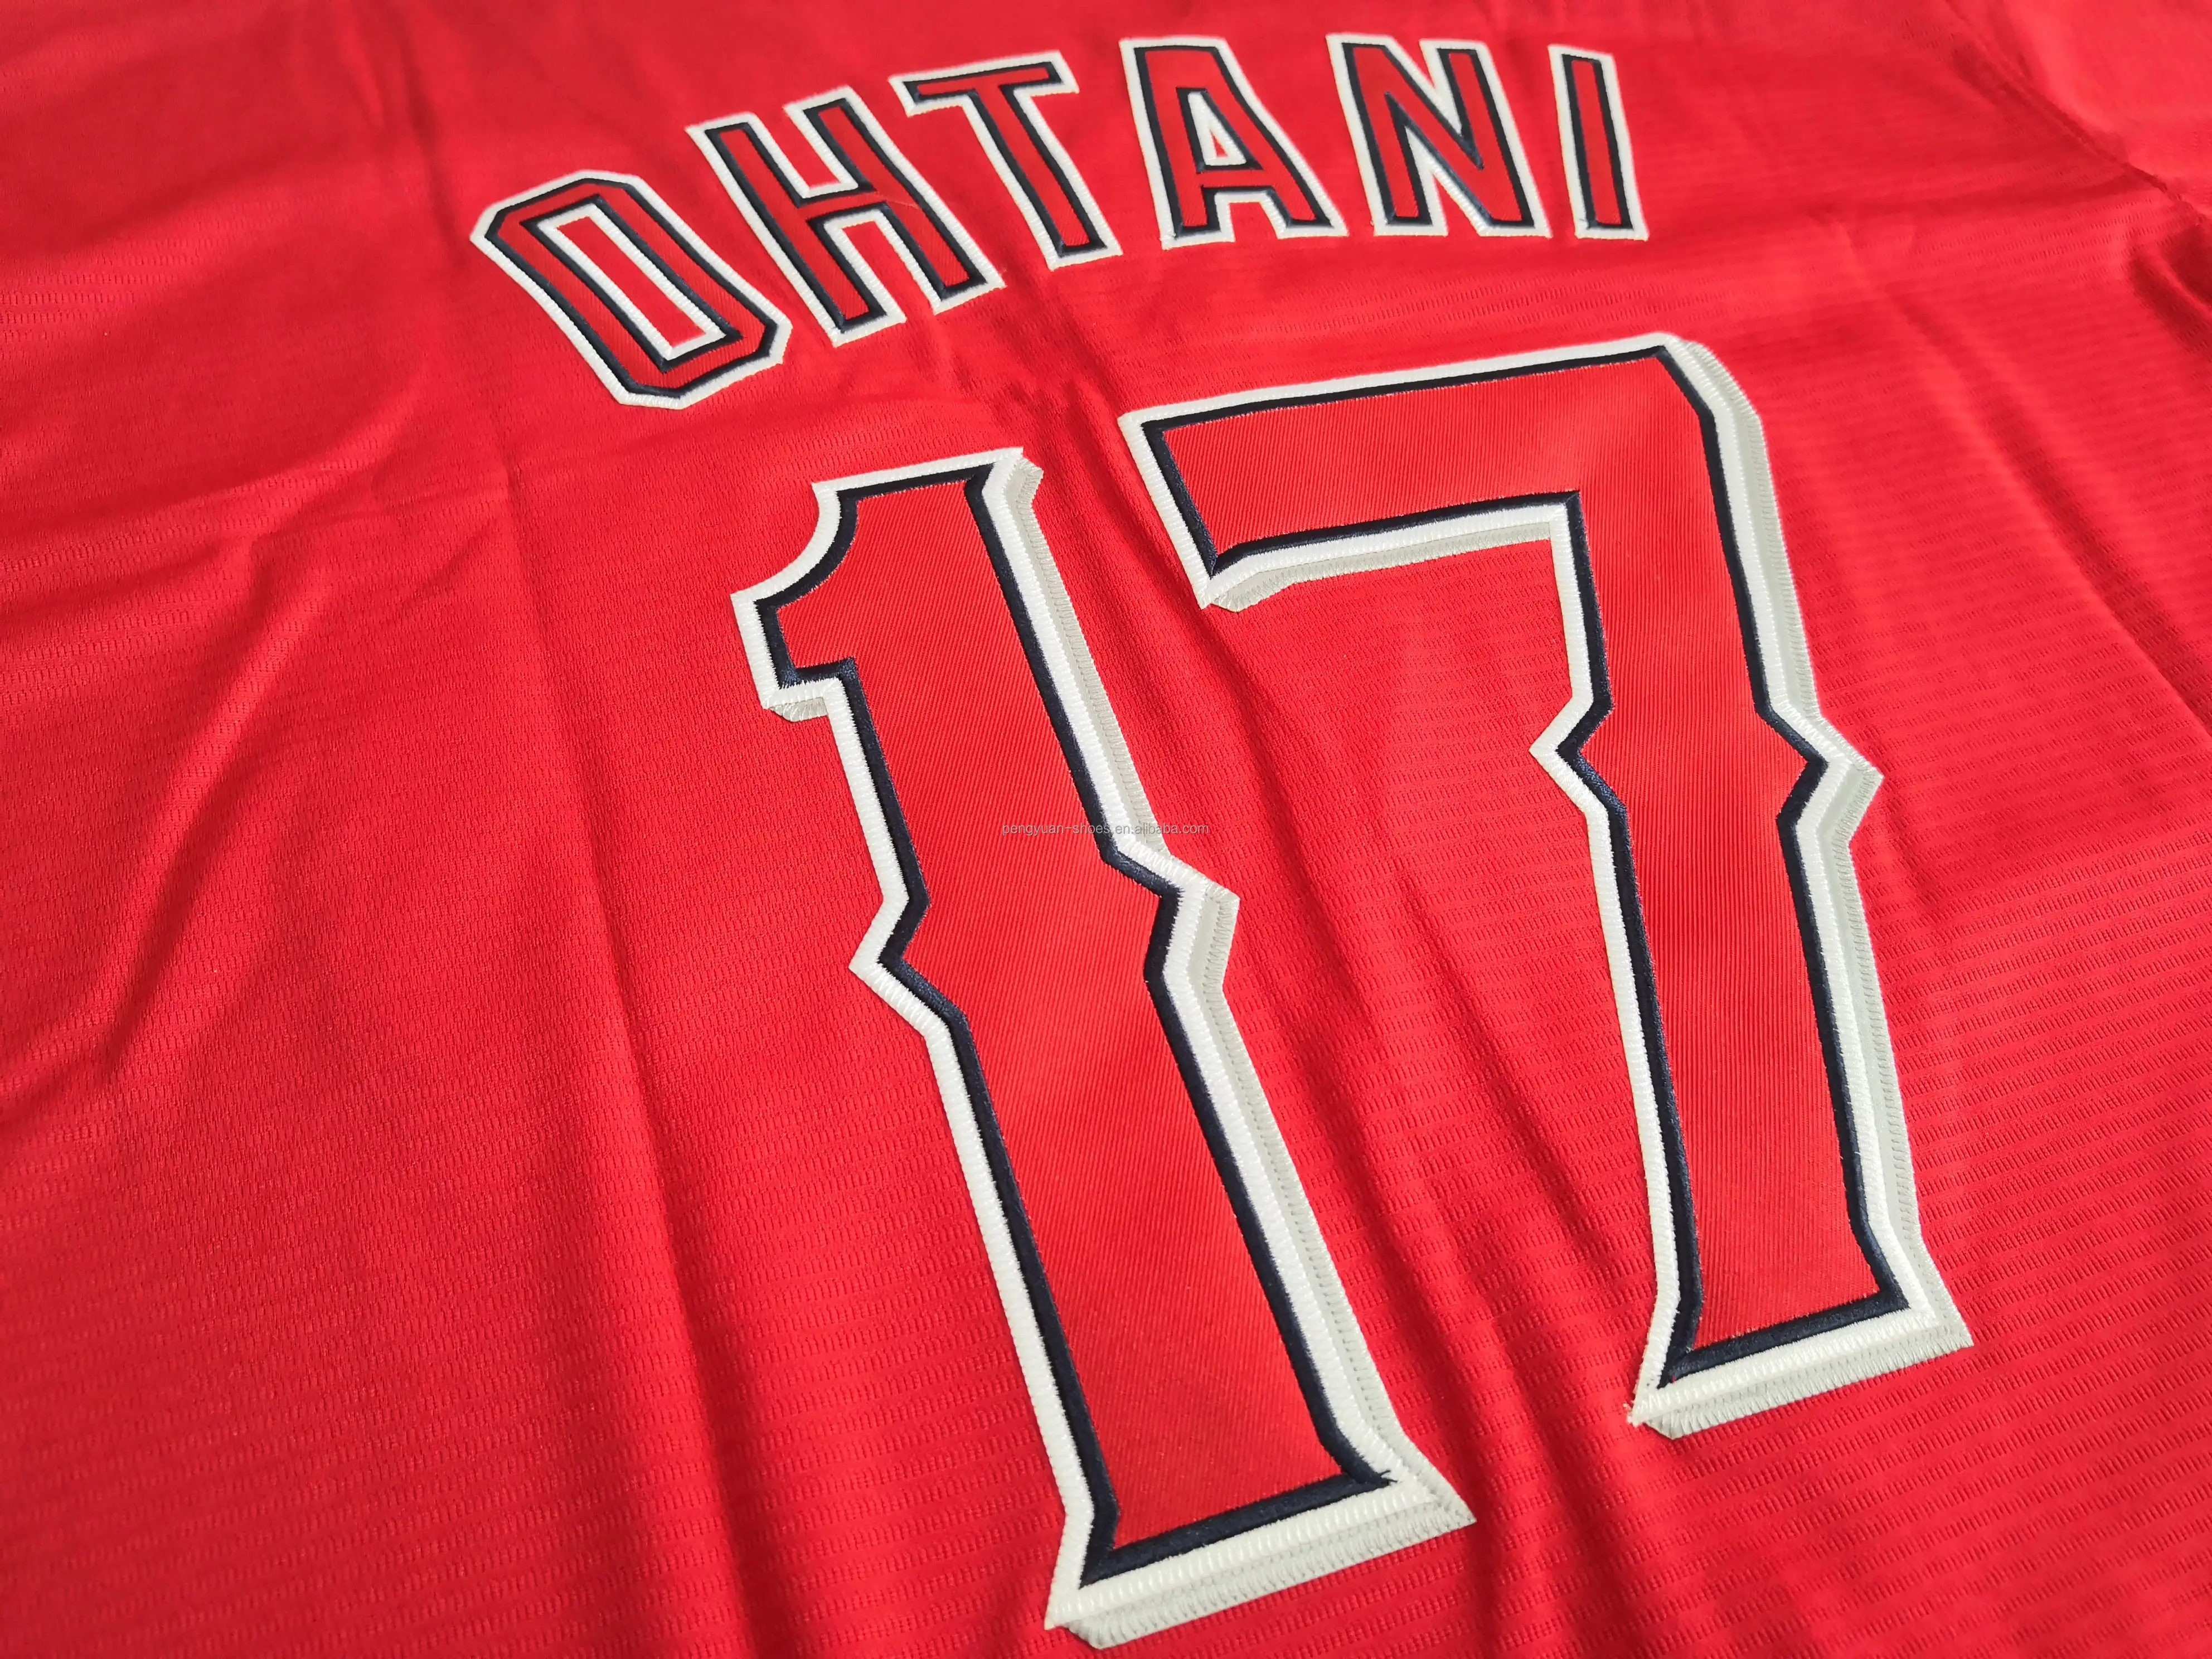 Wholesale Best Quality #17 Shohei Ohtani #27 Mike Trout #6 Anthony Rendon  Embroidered Customizable American Baseball Jersey From m.